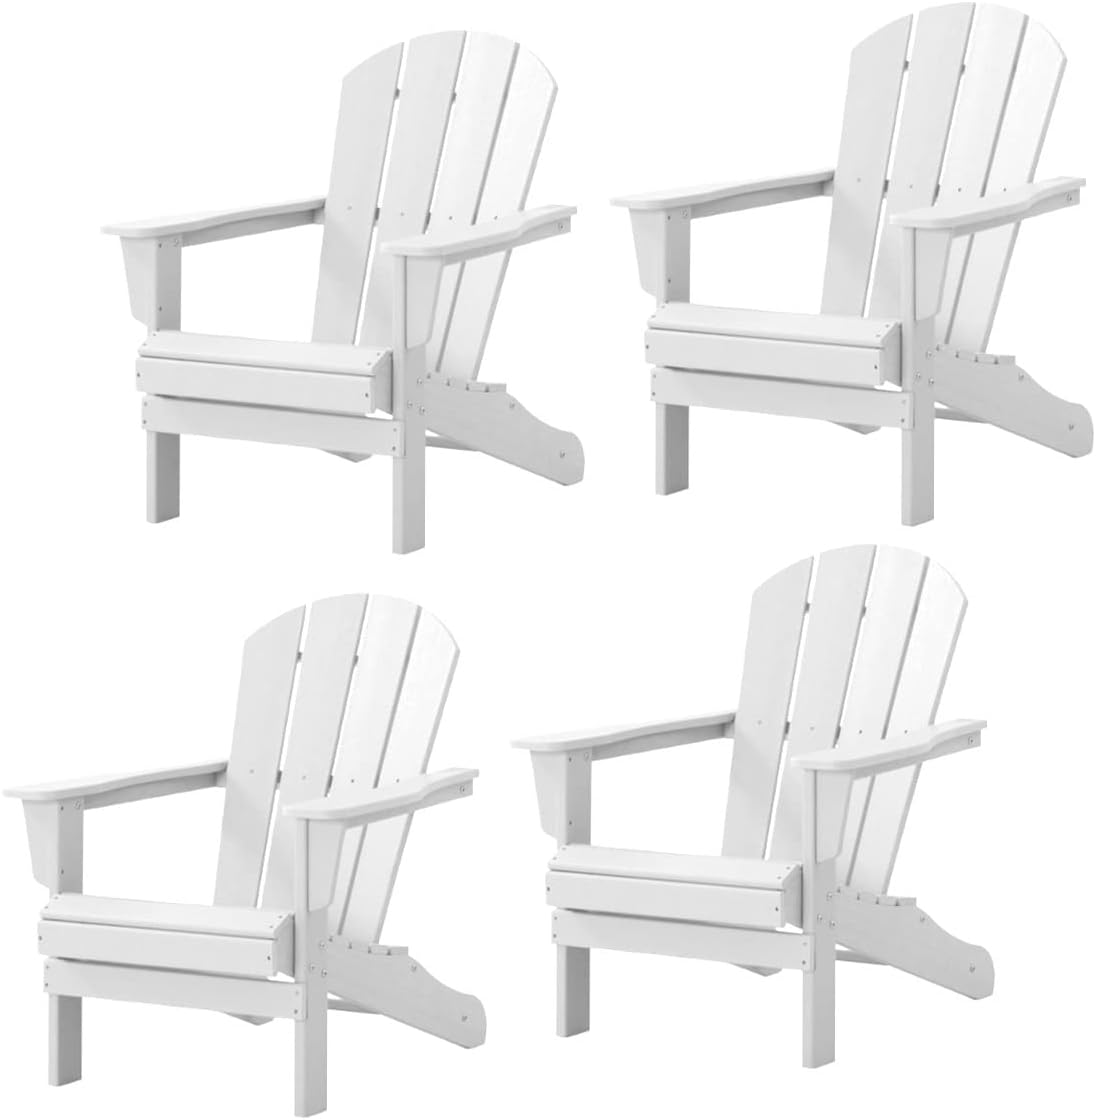 WILLIAMSPACE Adirondack Chairs Set of 4, Lifetime Outdoor Adirondack Chair Oversized Fire Pit Chair, Weather Resistant HDPE Patio Chair Easy Installation for Garden, Poolside, Backyard, Beach (White)